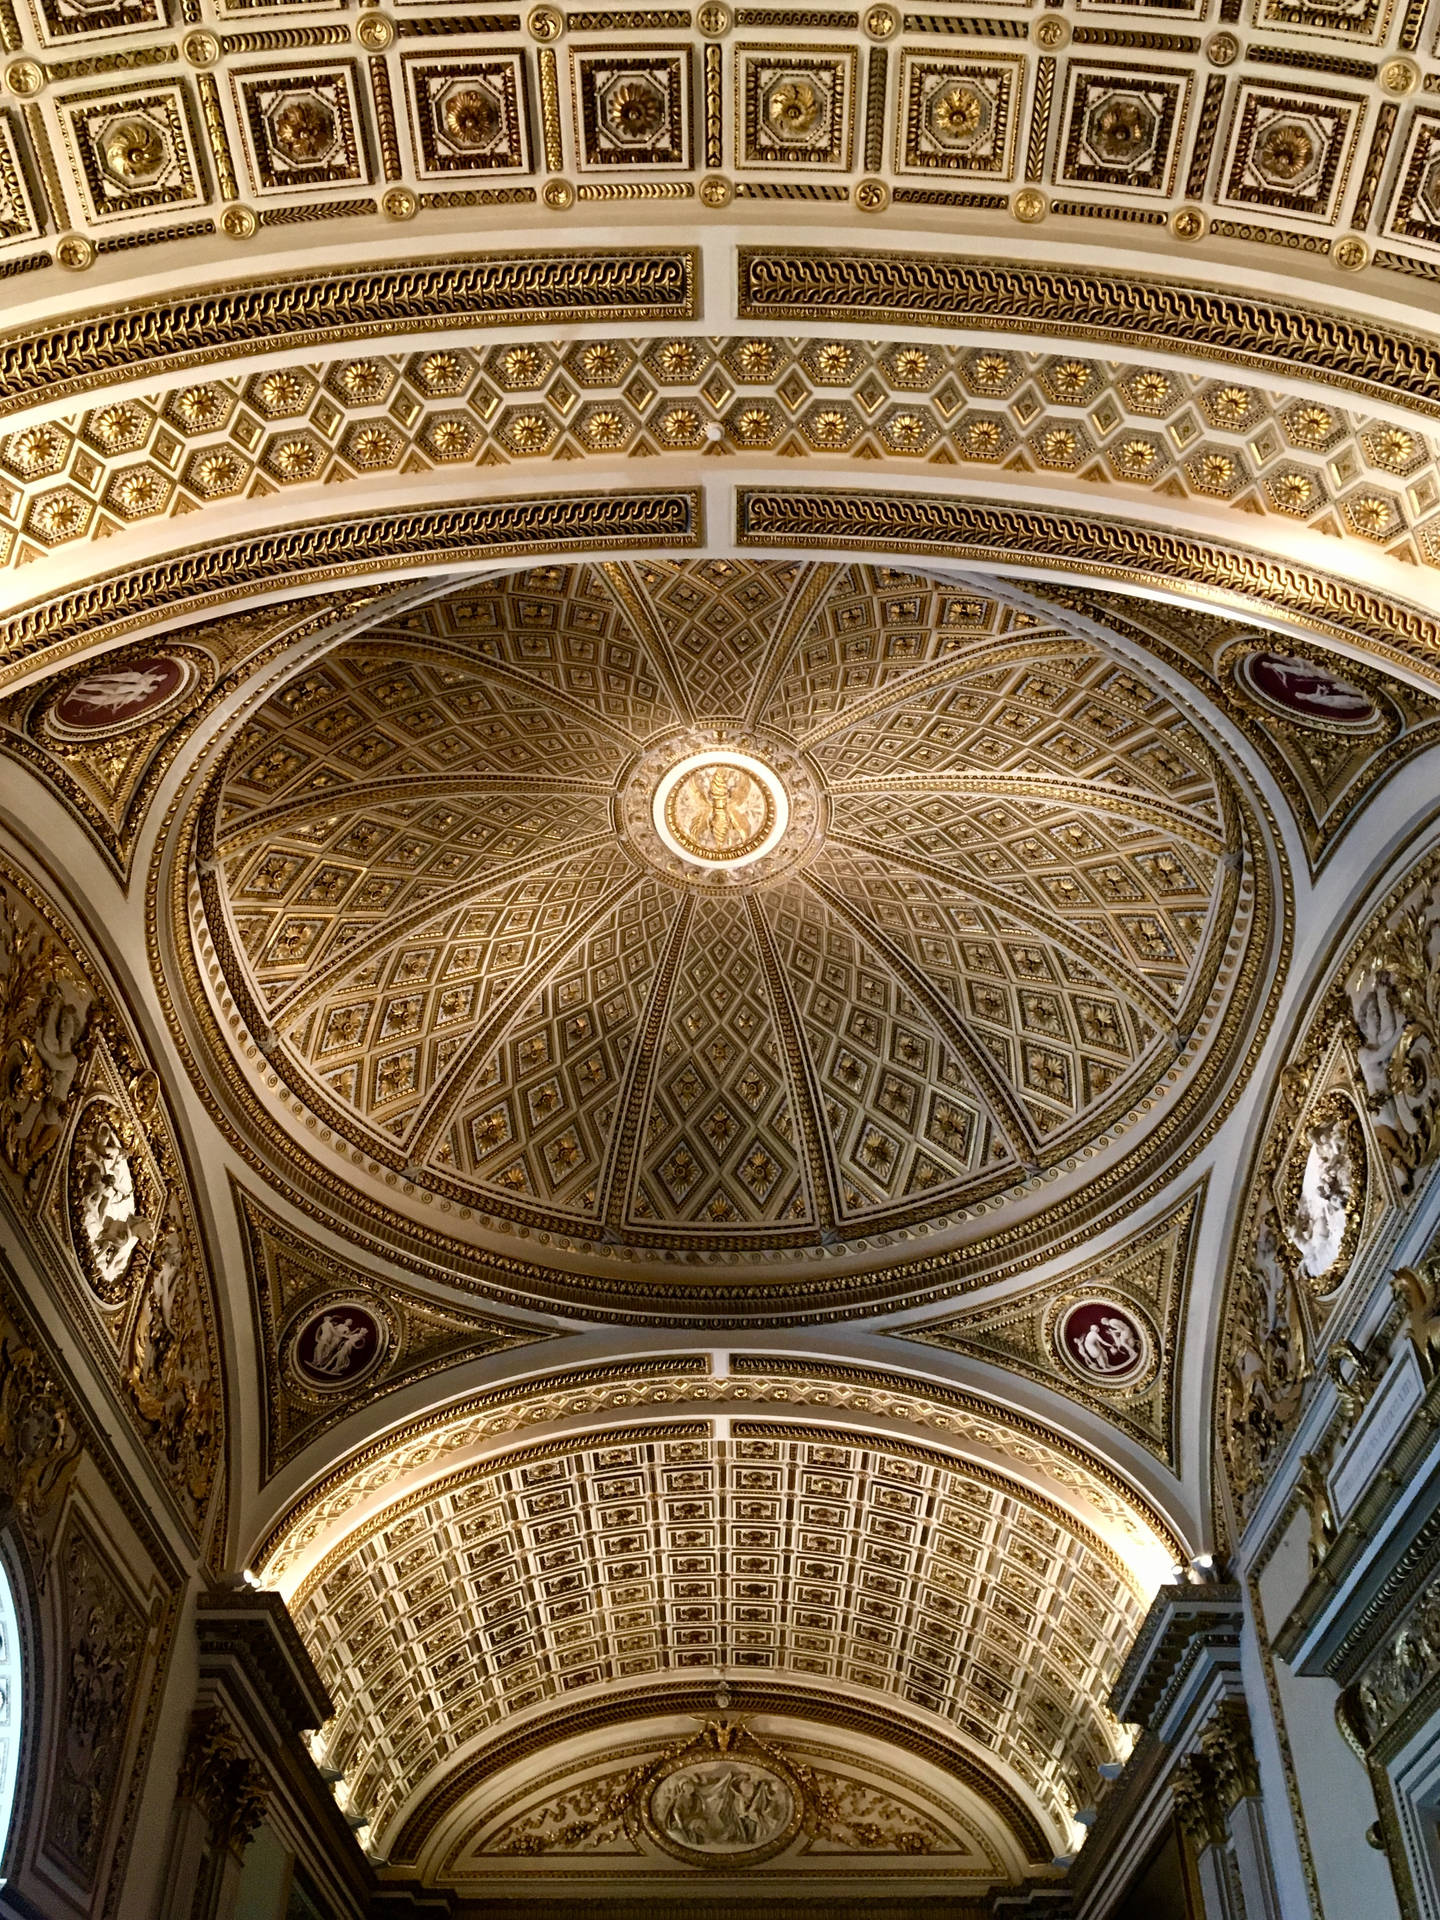 Gold Ceiling At Uffizi Gallery Background